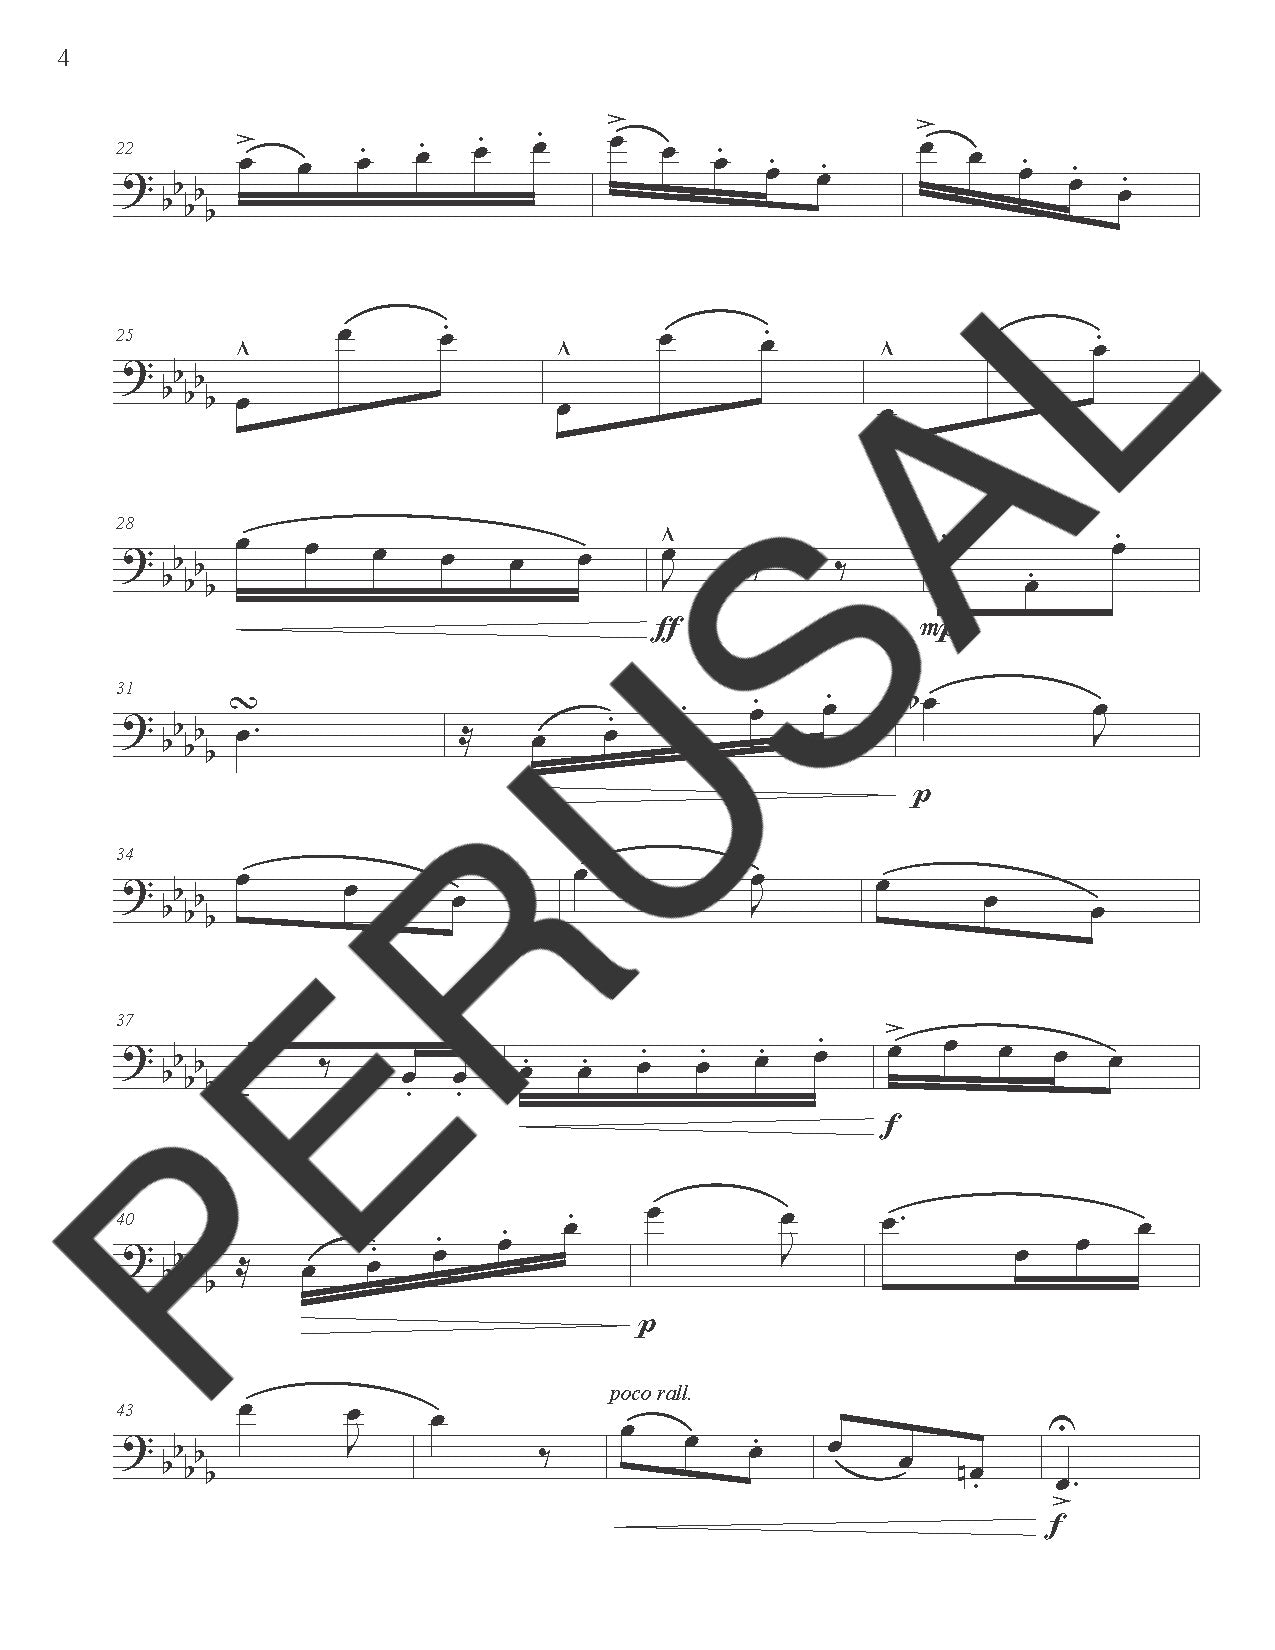 Day, Kevin - 25 Advanced Etudes for Euphonium (Bass Clef)